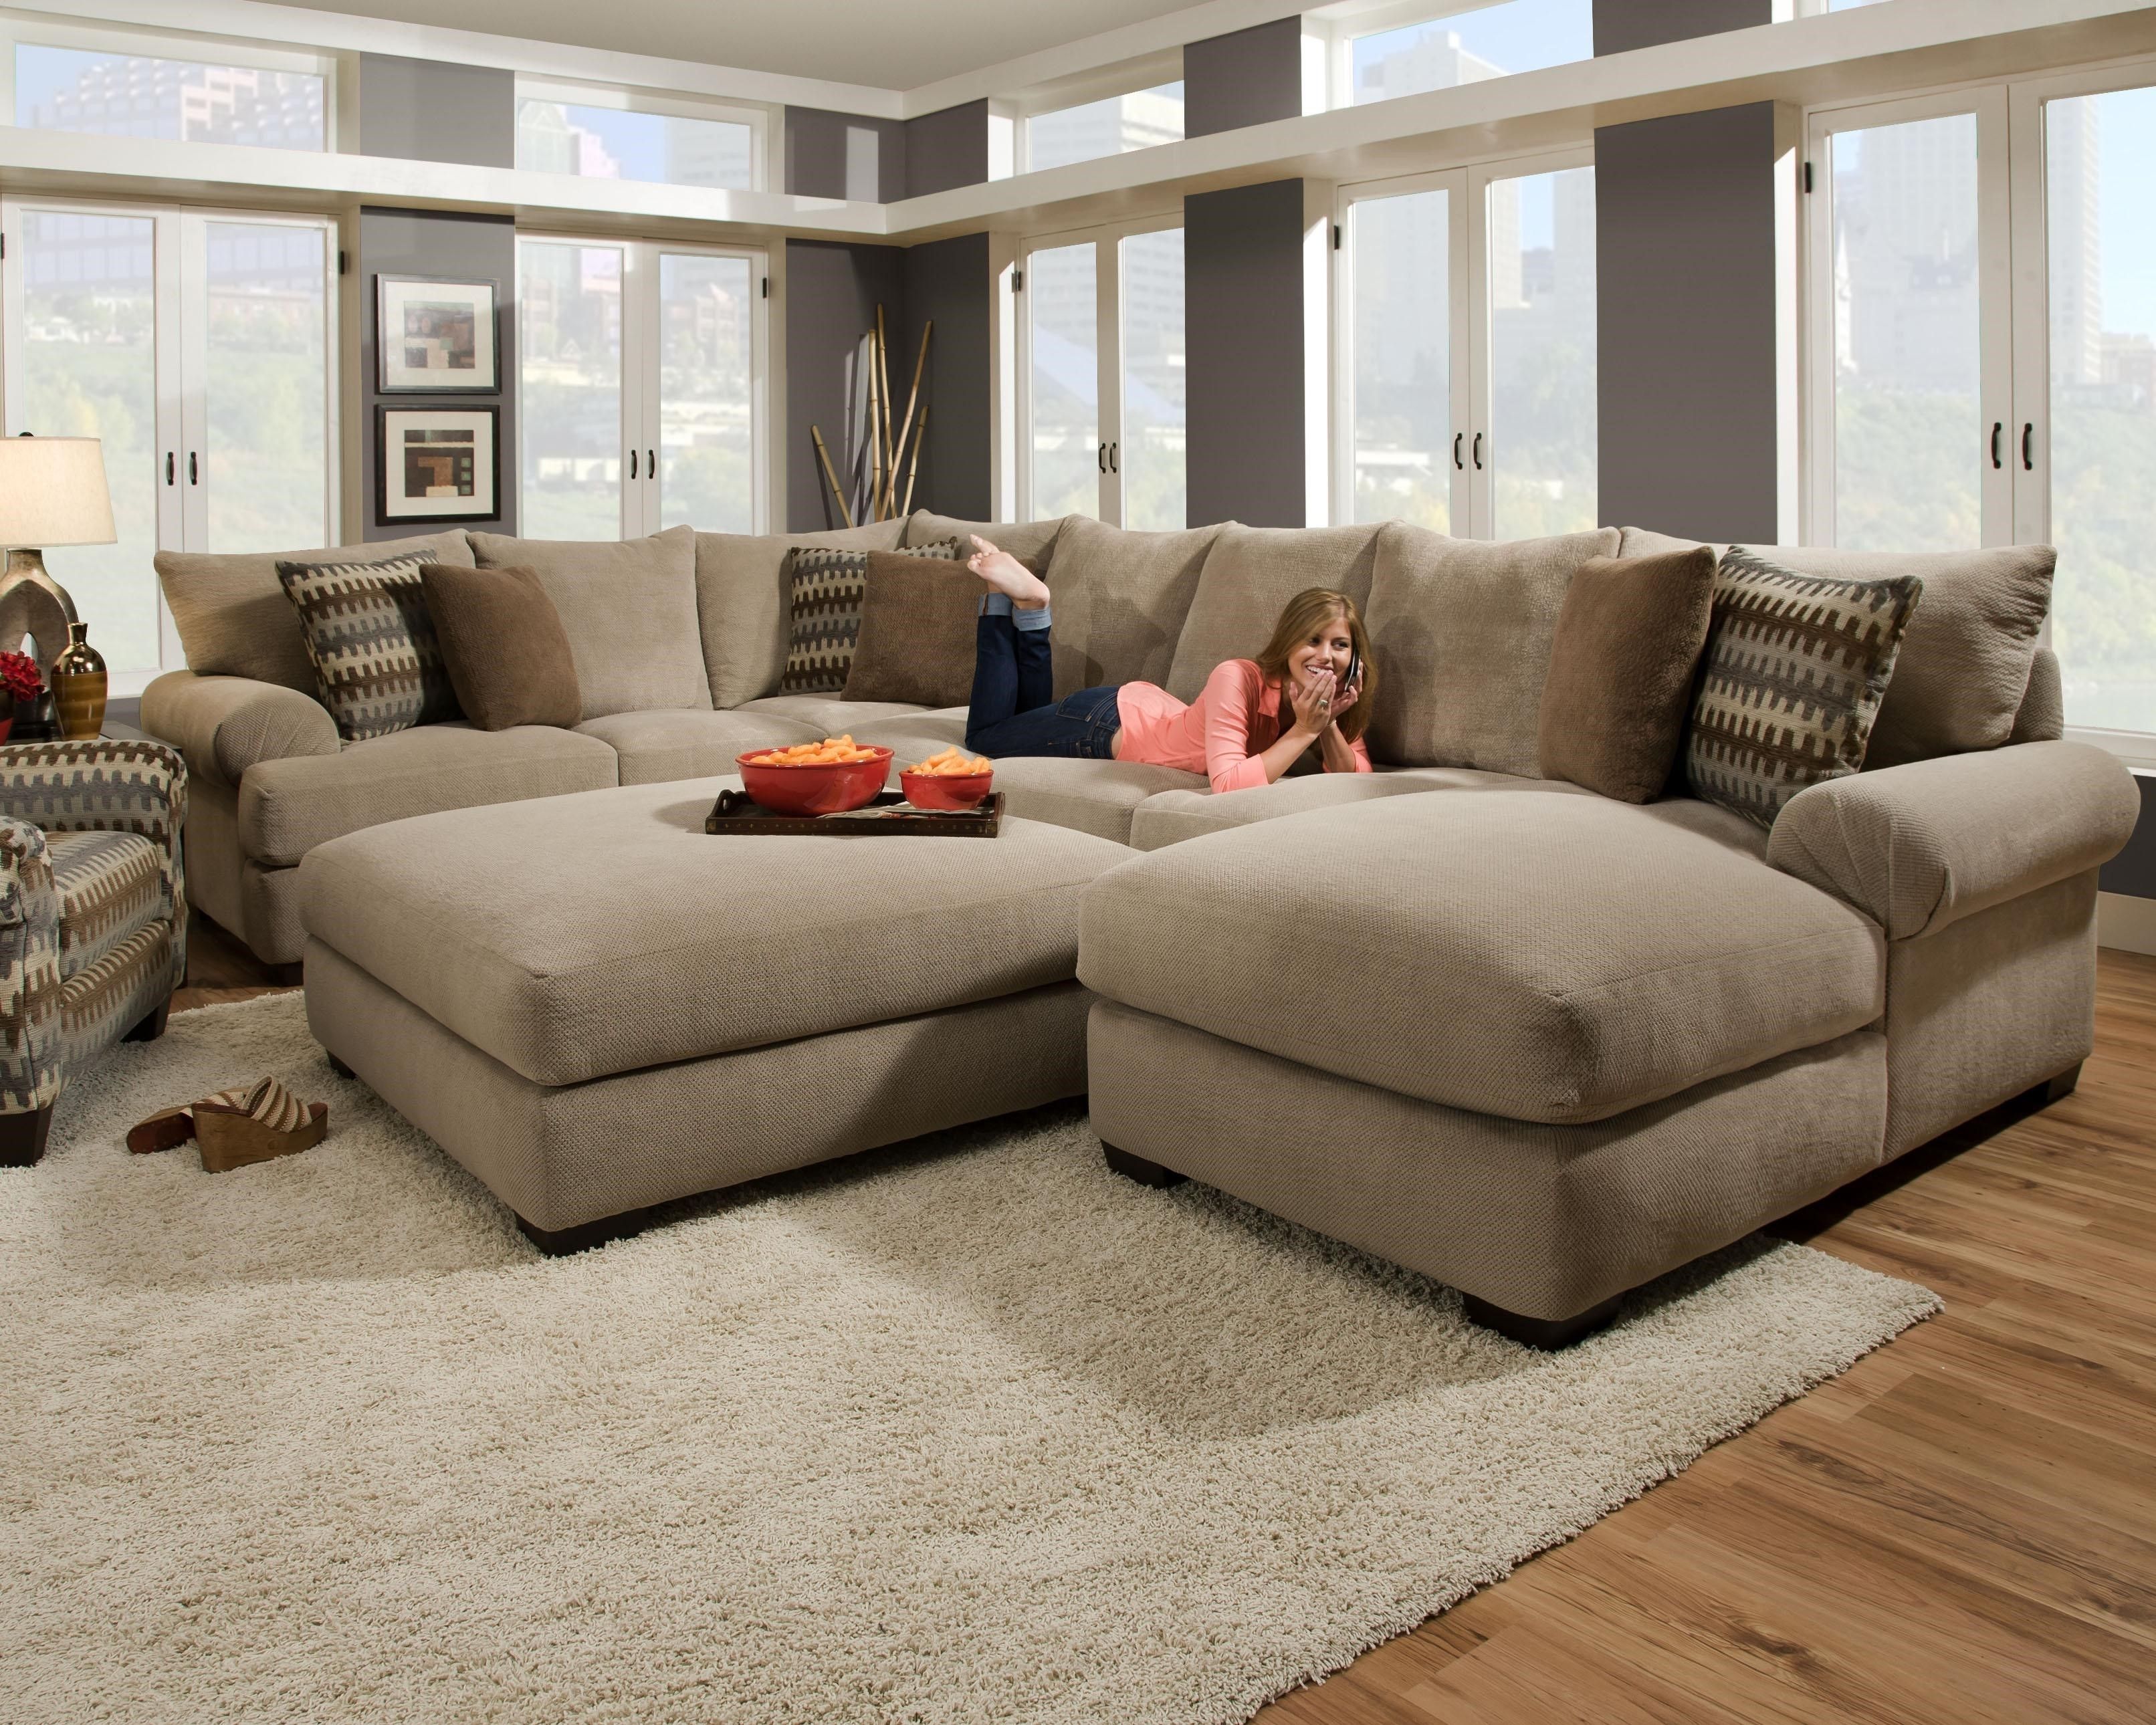 Incredible Modern Sectional Sofas Vancouver – Buildsimplehome Throughout Vancouver Sectional Sofas (View 8 of 10)